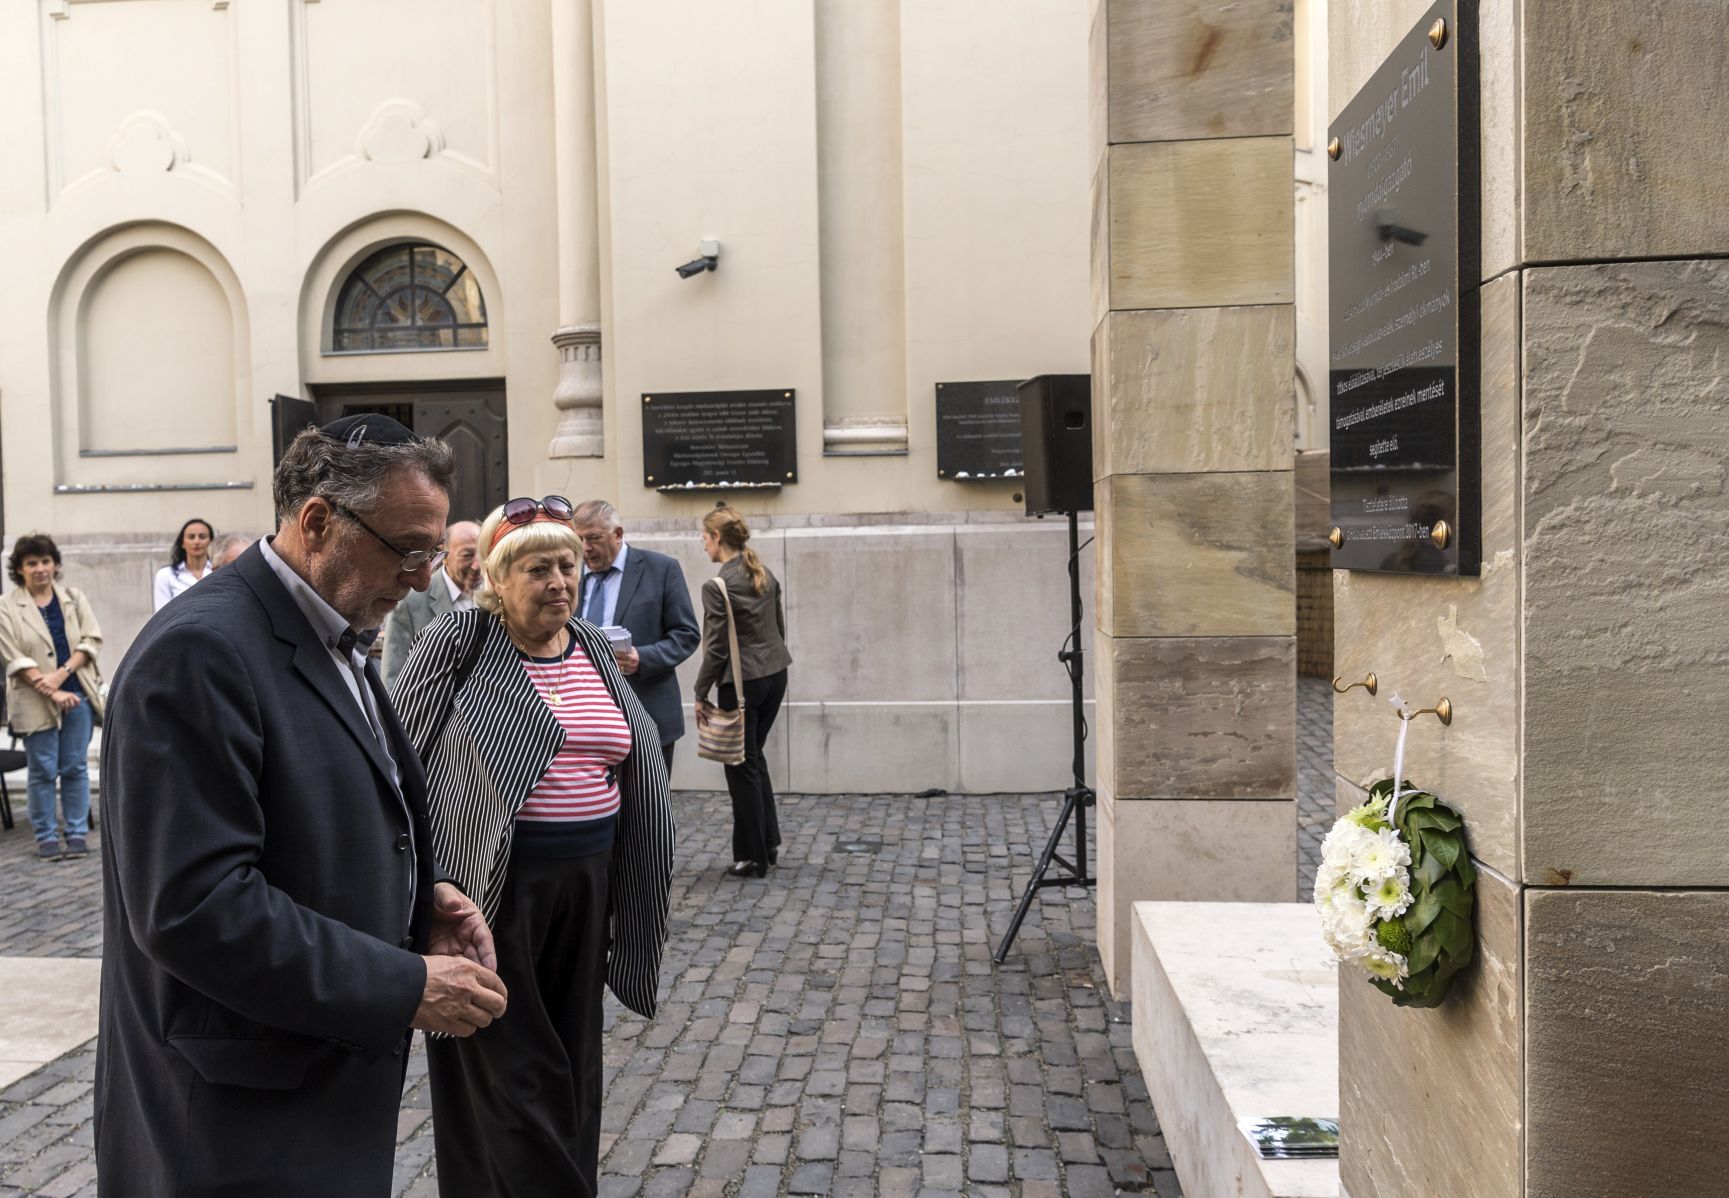 Hungarian who helped Jews flee Holocaust honored in Budapest - The ...